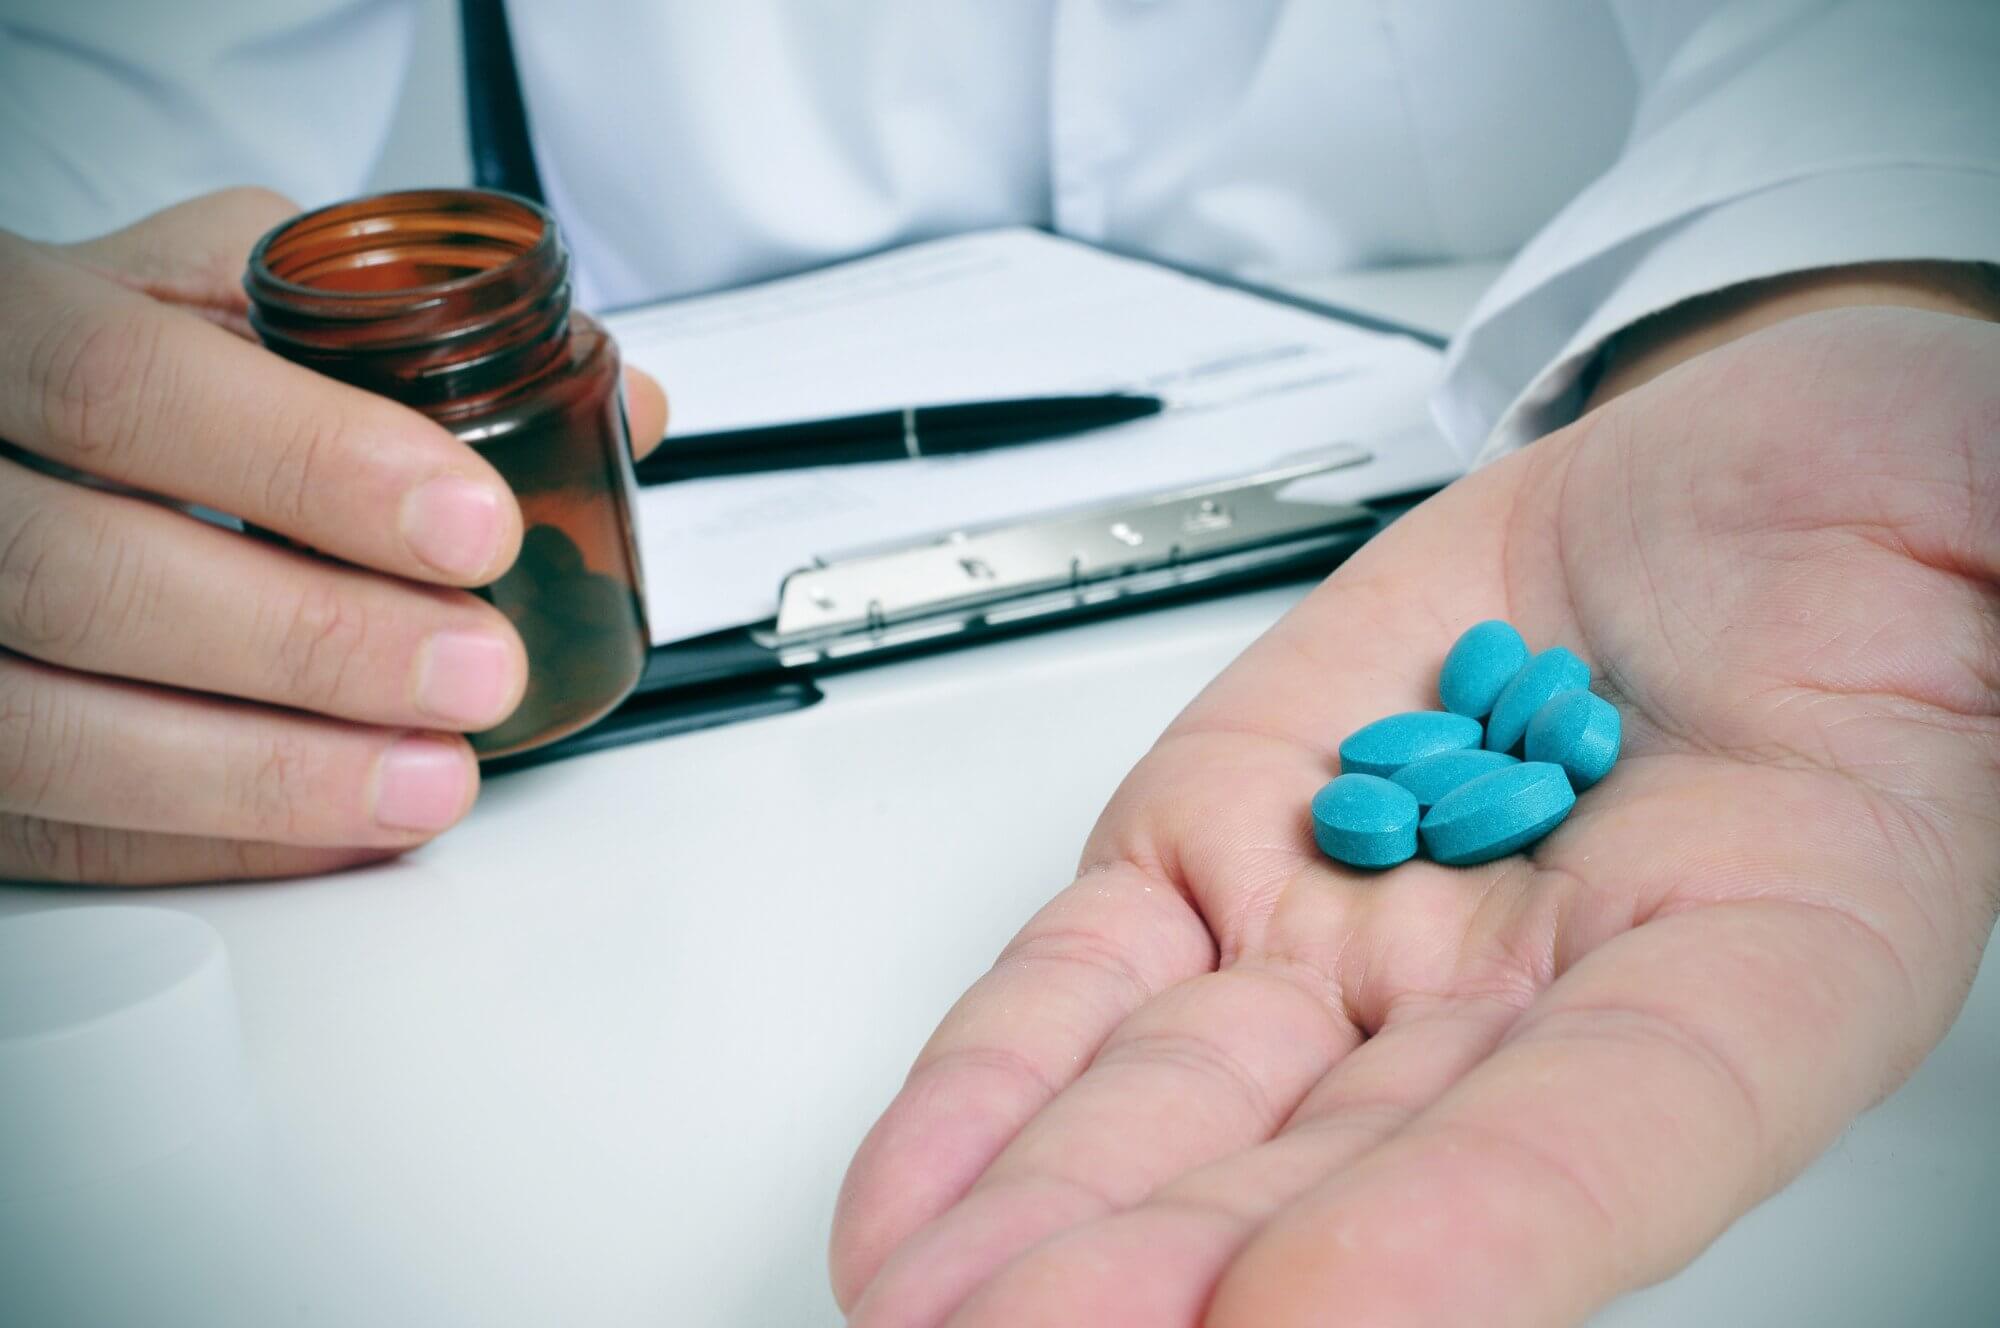 Generic Viagra - 6 Frequently Asked Questions and Answers (FAQs)